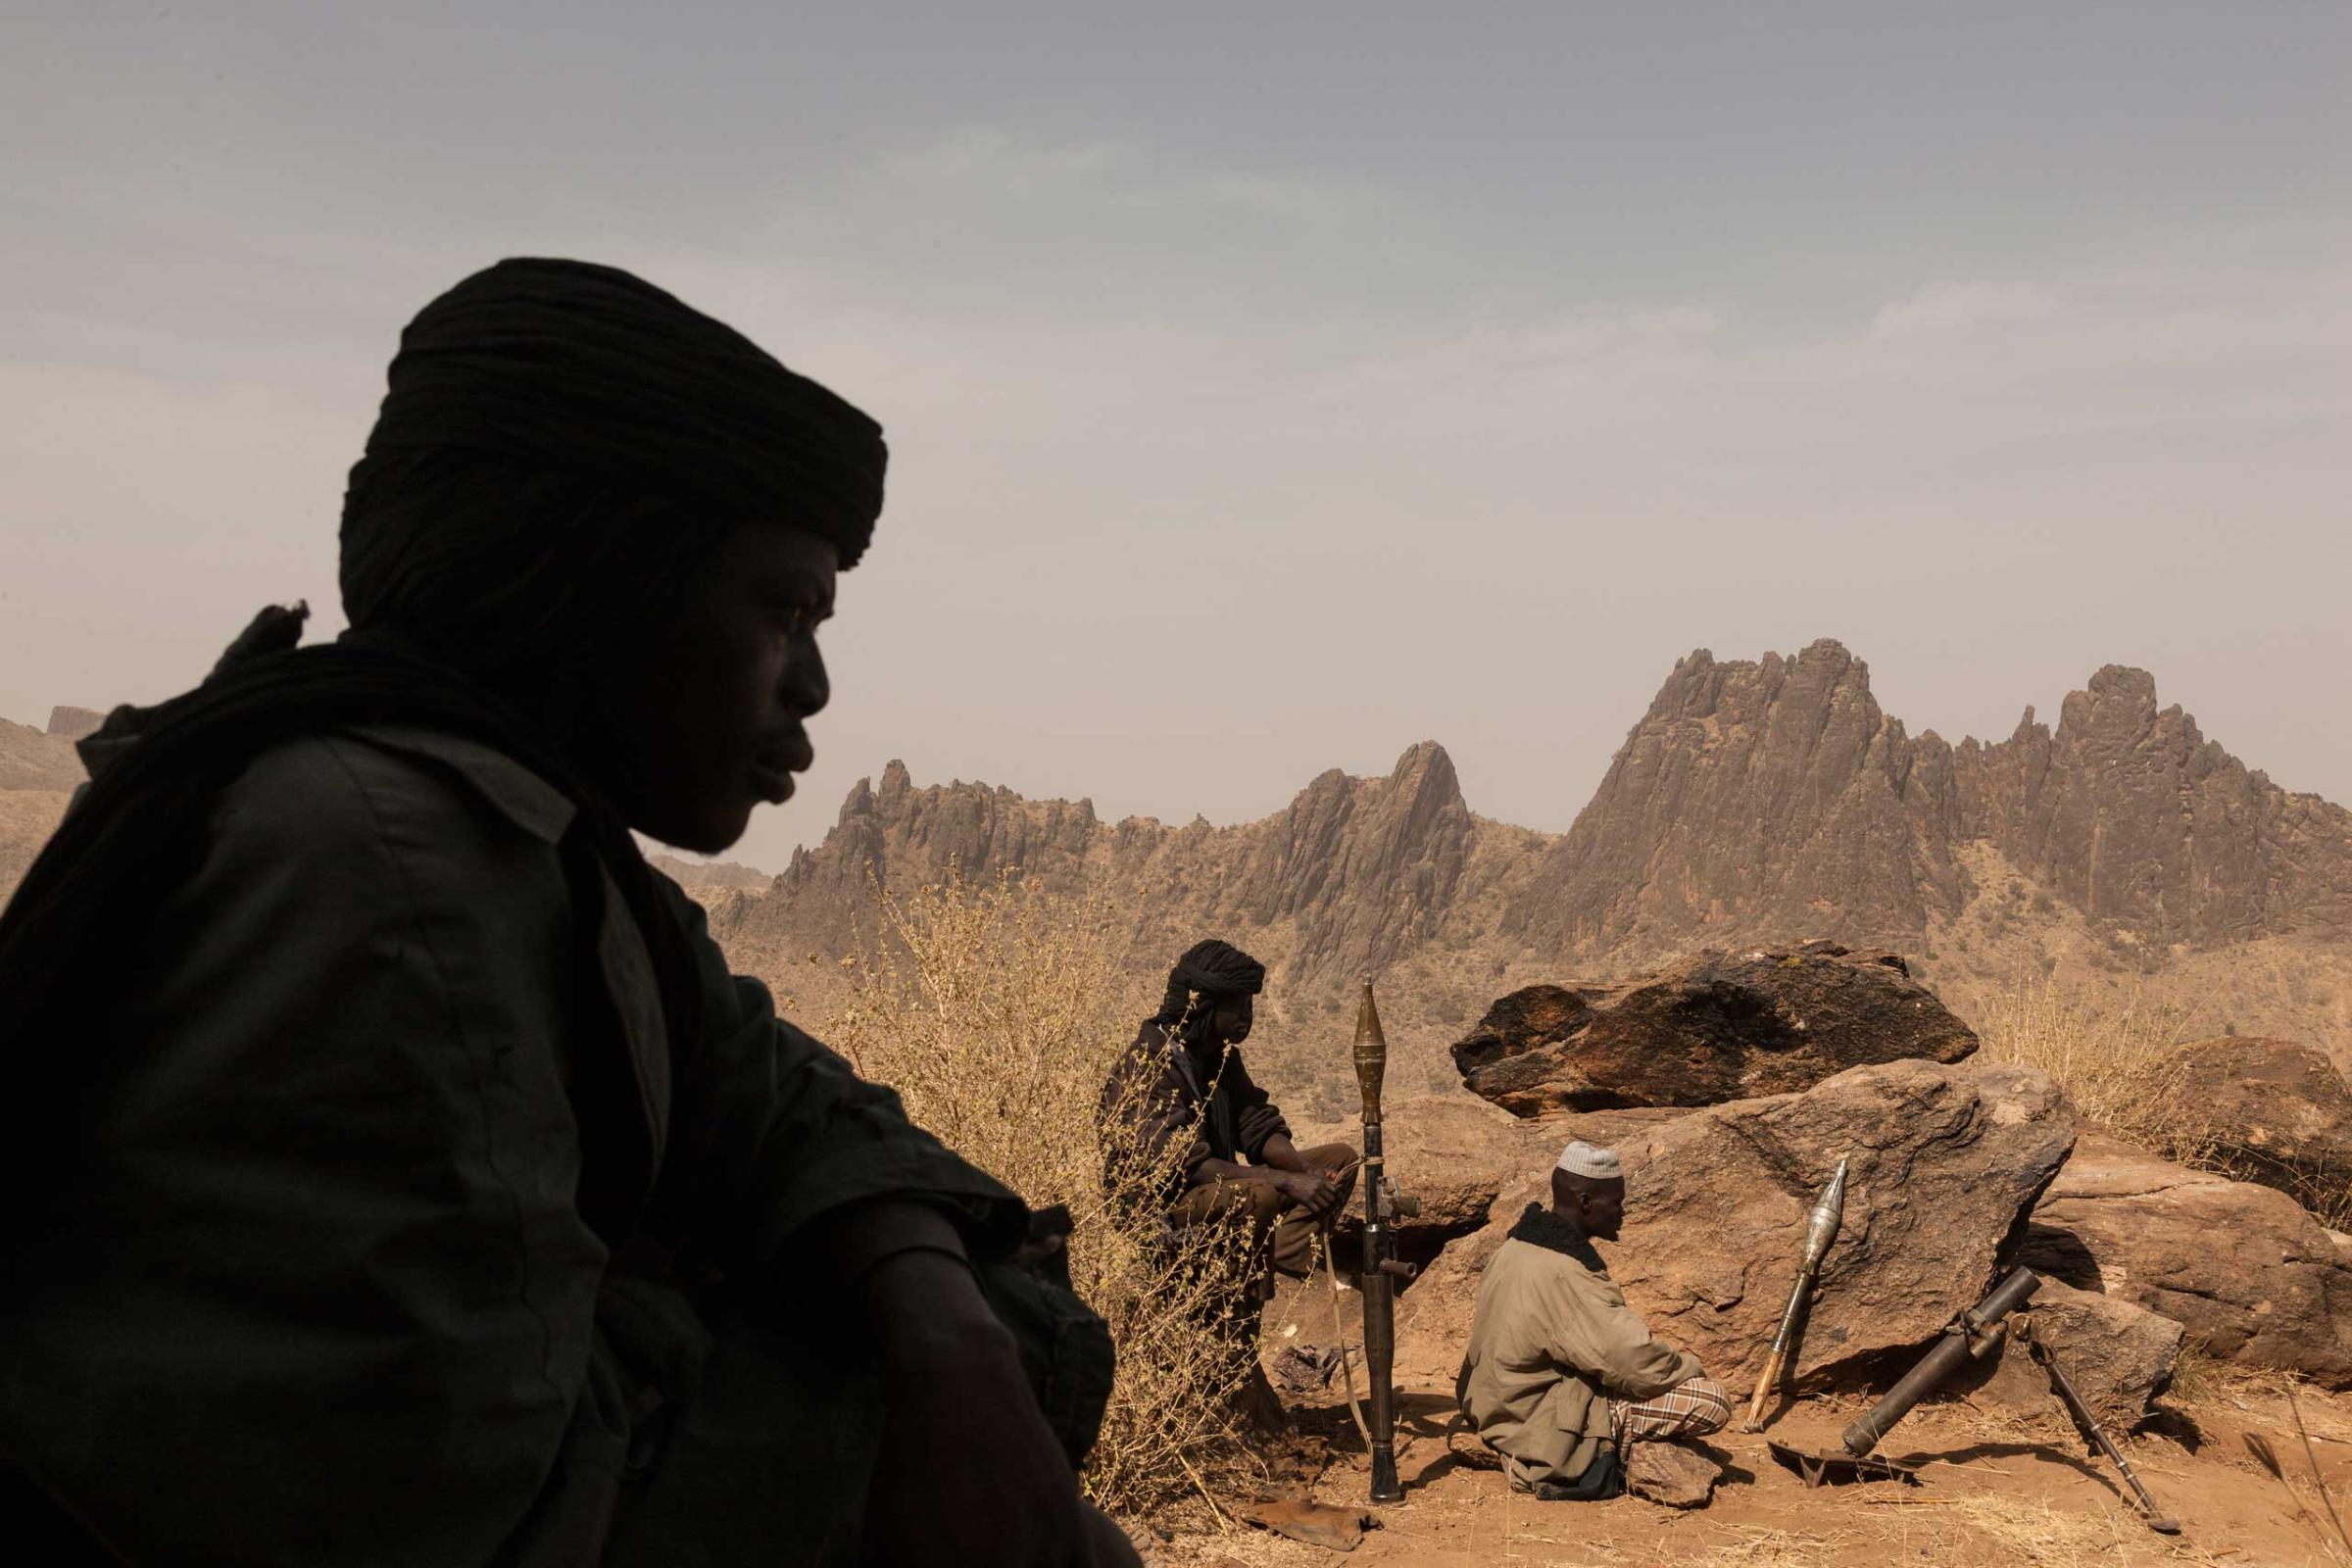 Rebels of the Sudan Liberation Army, led by Abdul Wahid (SLA-AW), defended the top of a mountain from government forces in Central Darfur, Sudan, on March 4, 2015.